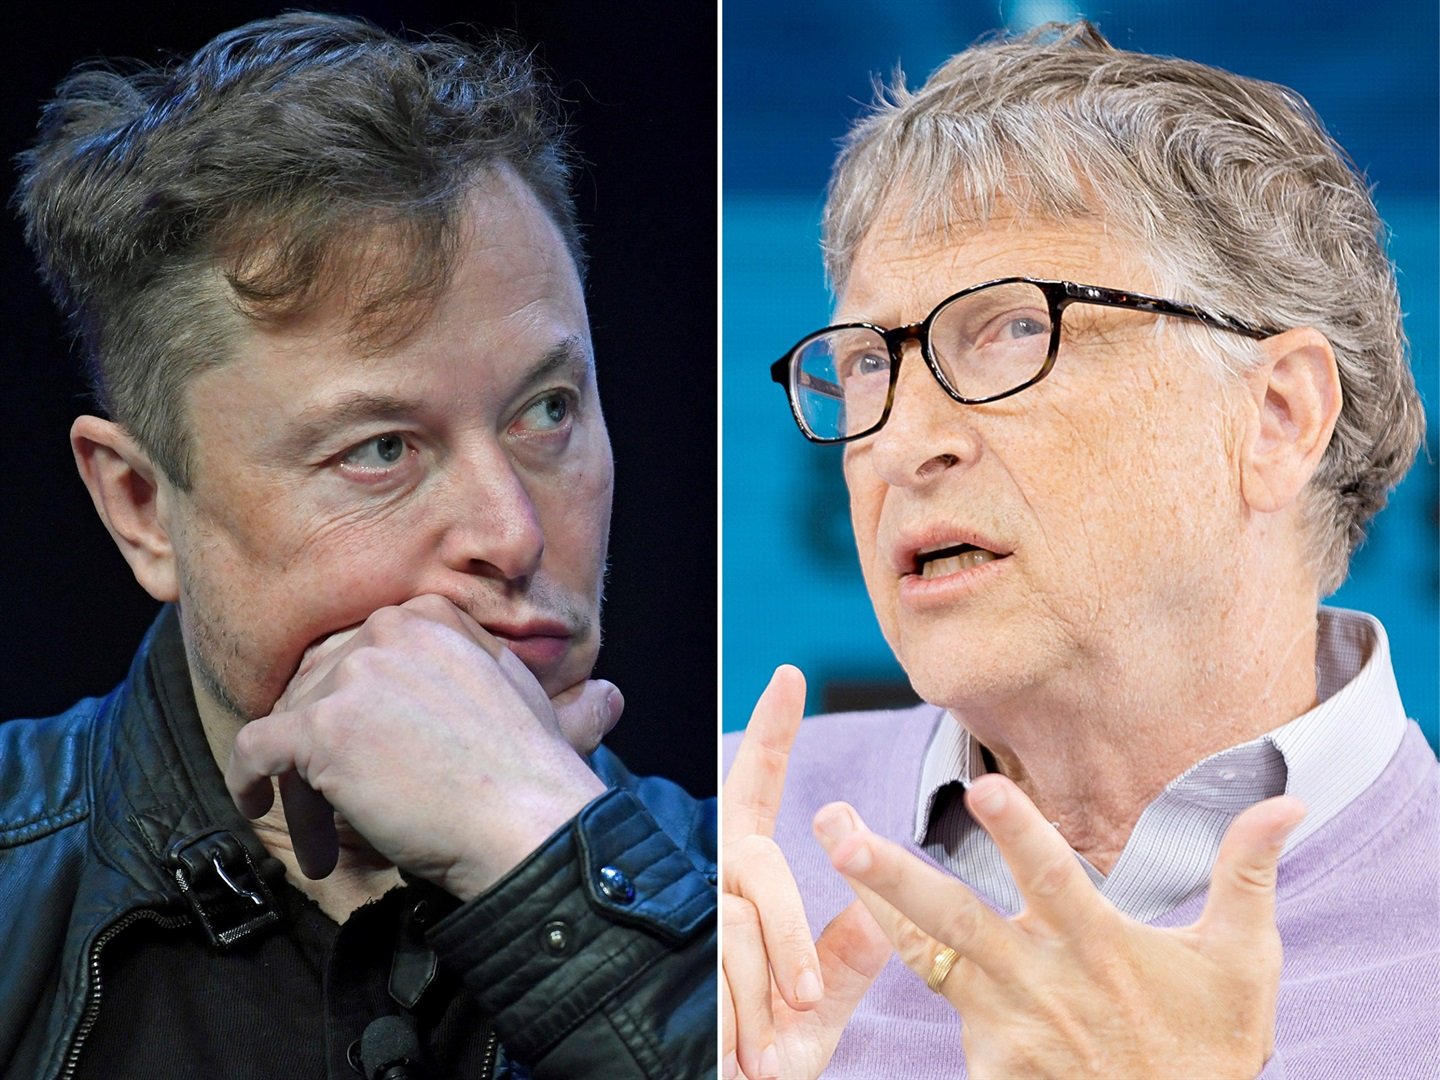 Elon Musk took a swipe at Bill Gates, with an edited version of an anti